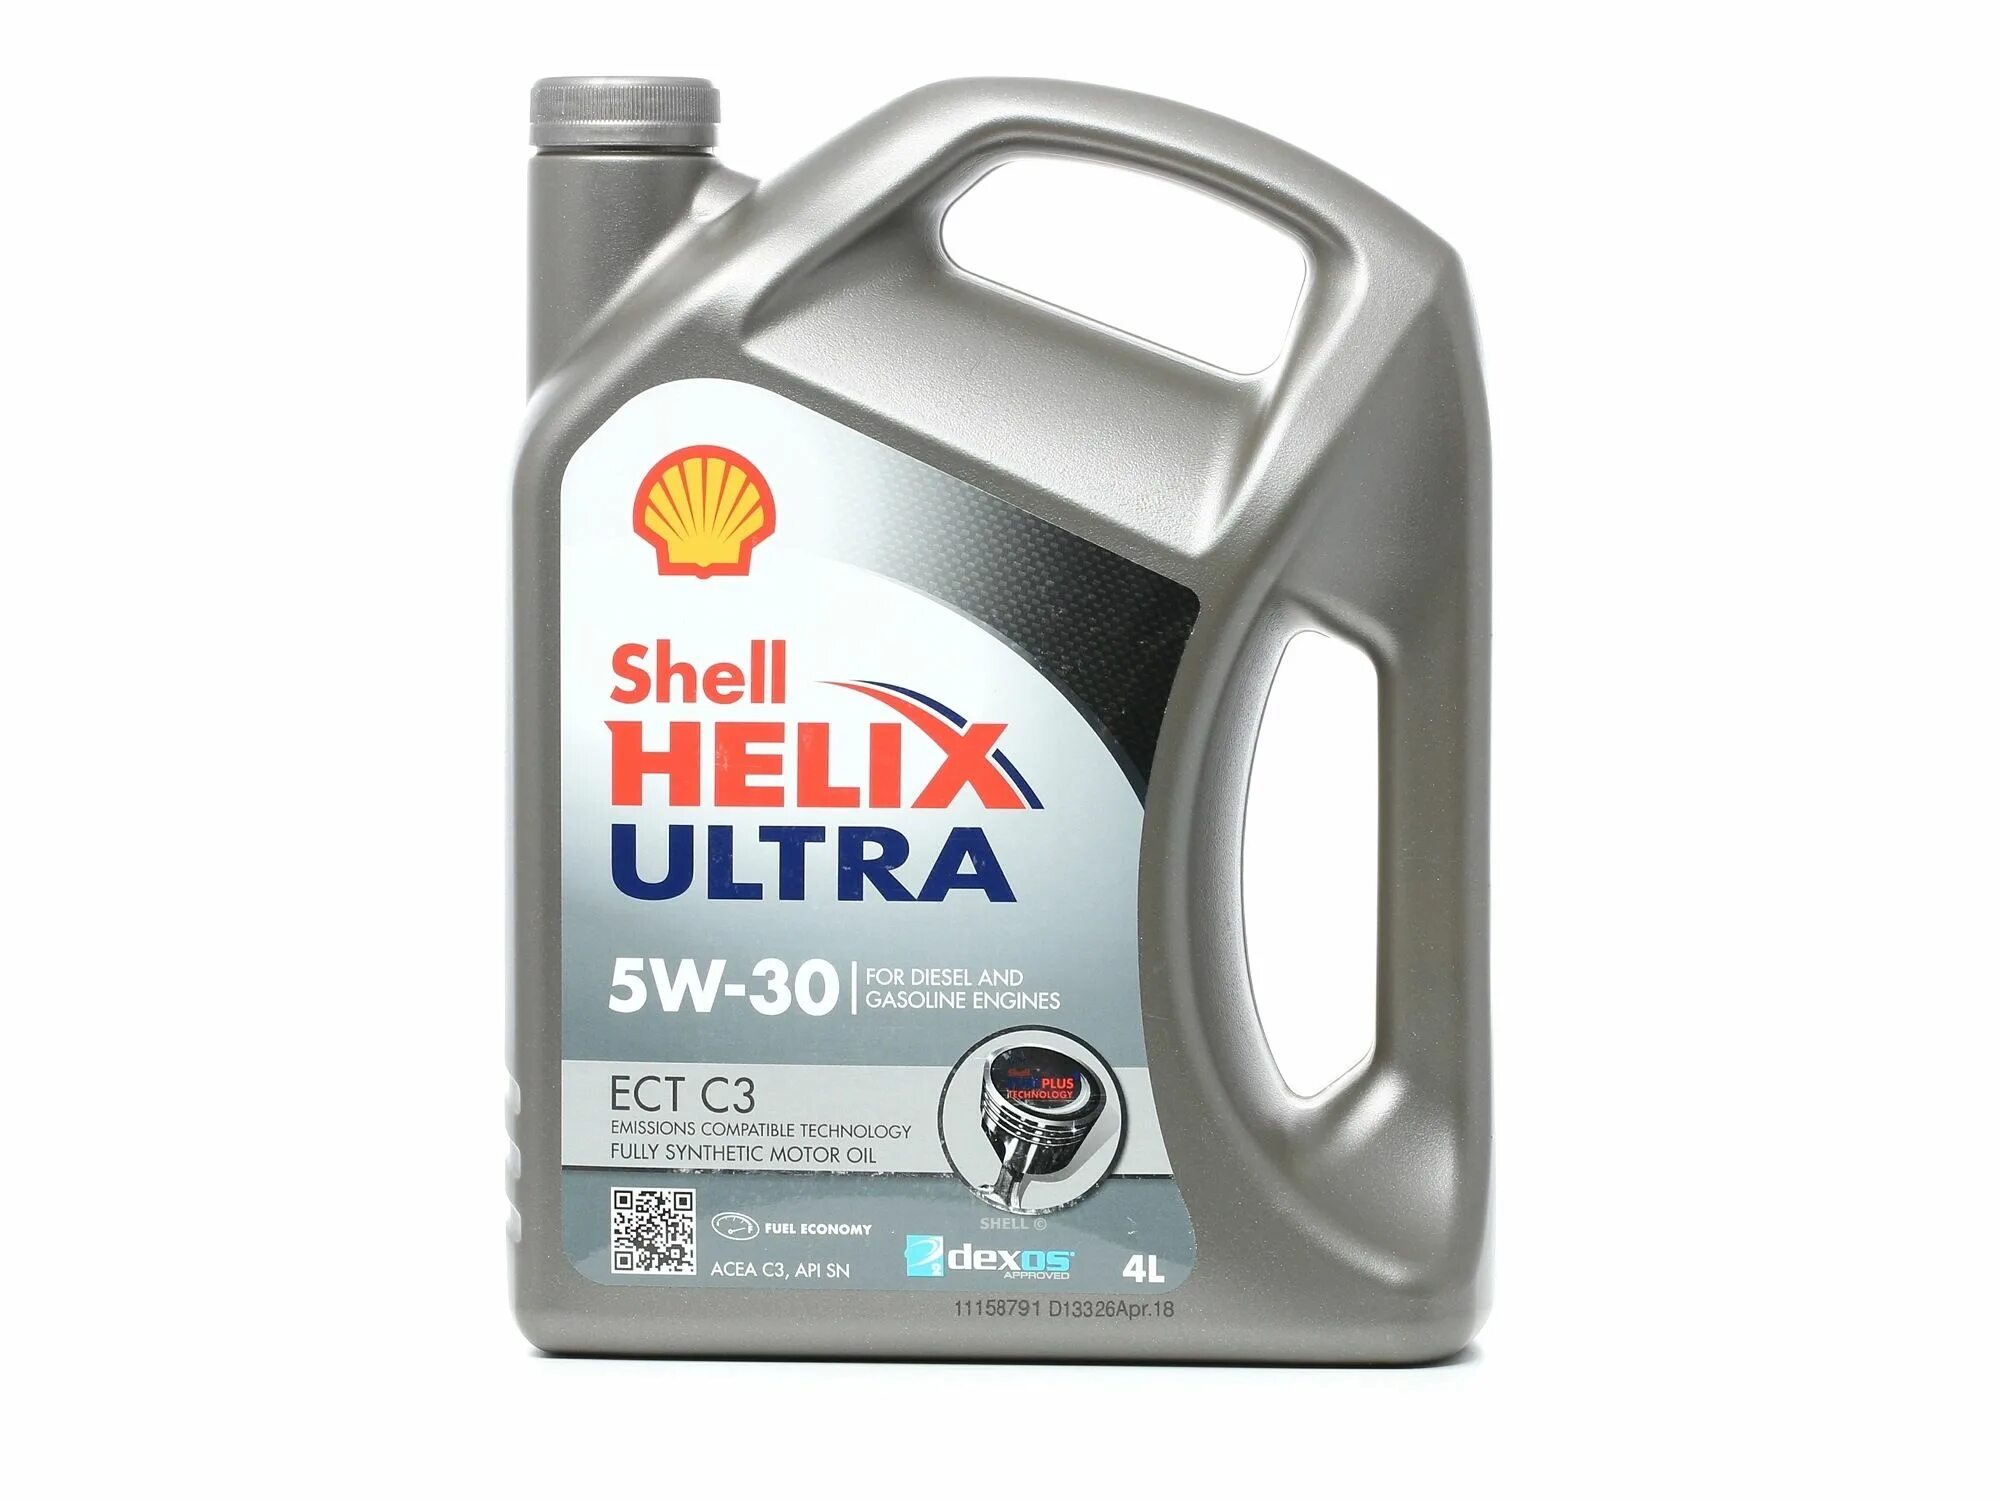 Масло shell helix ect 5w30. Масло моторное Shell Helix Ultra 5w40 [SN/CF] синтетическое 4л. Shell Helix Ultra 5w30 30 л. Shell Helix Ultra ect c3. Масло Шелл Хеликс ультра 5w30 ect c3.